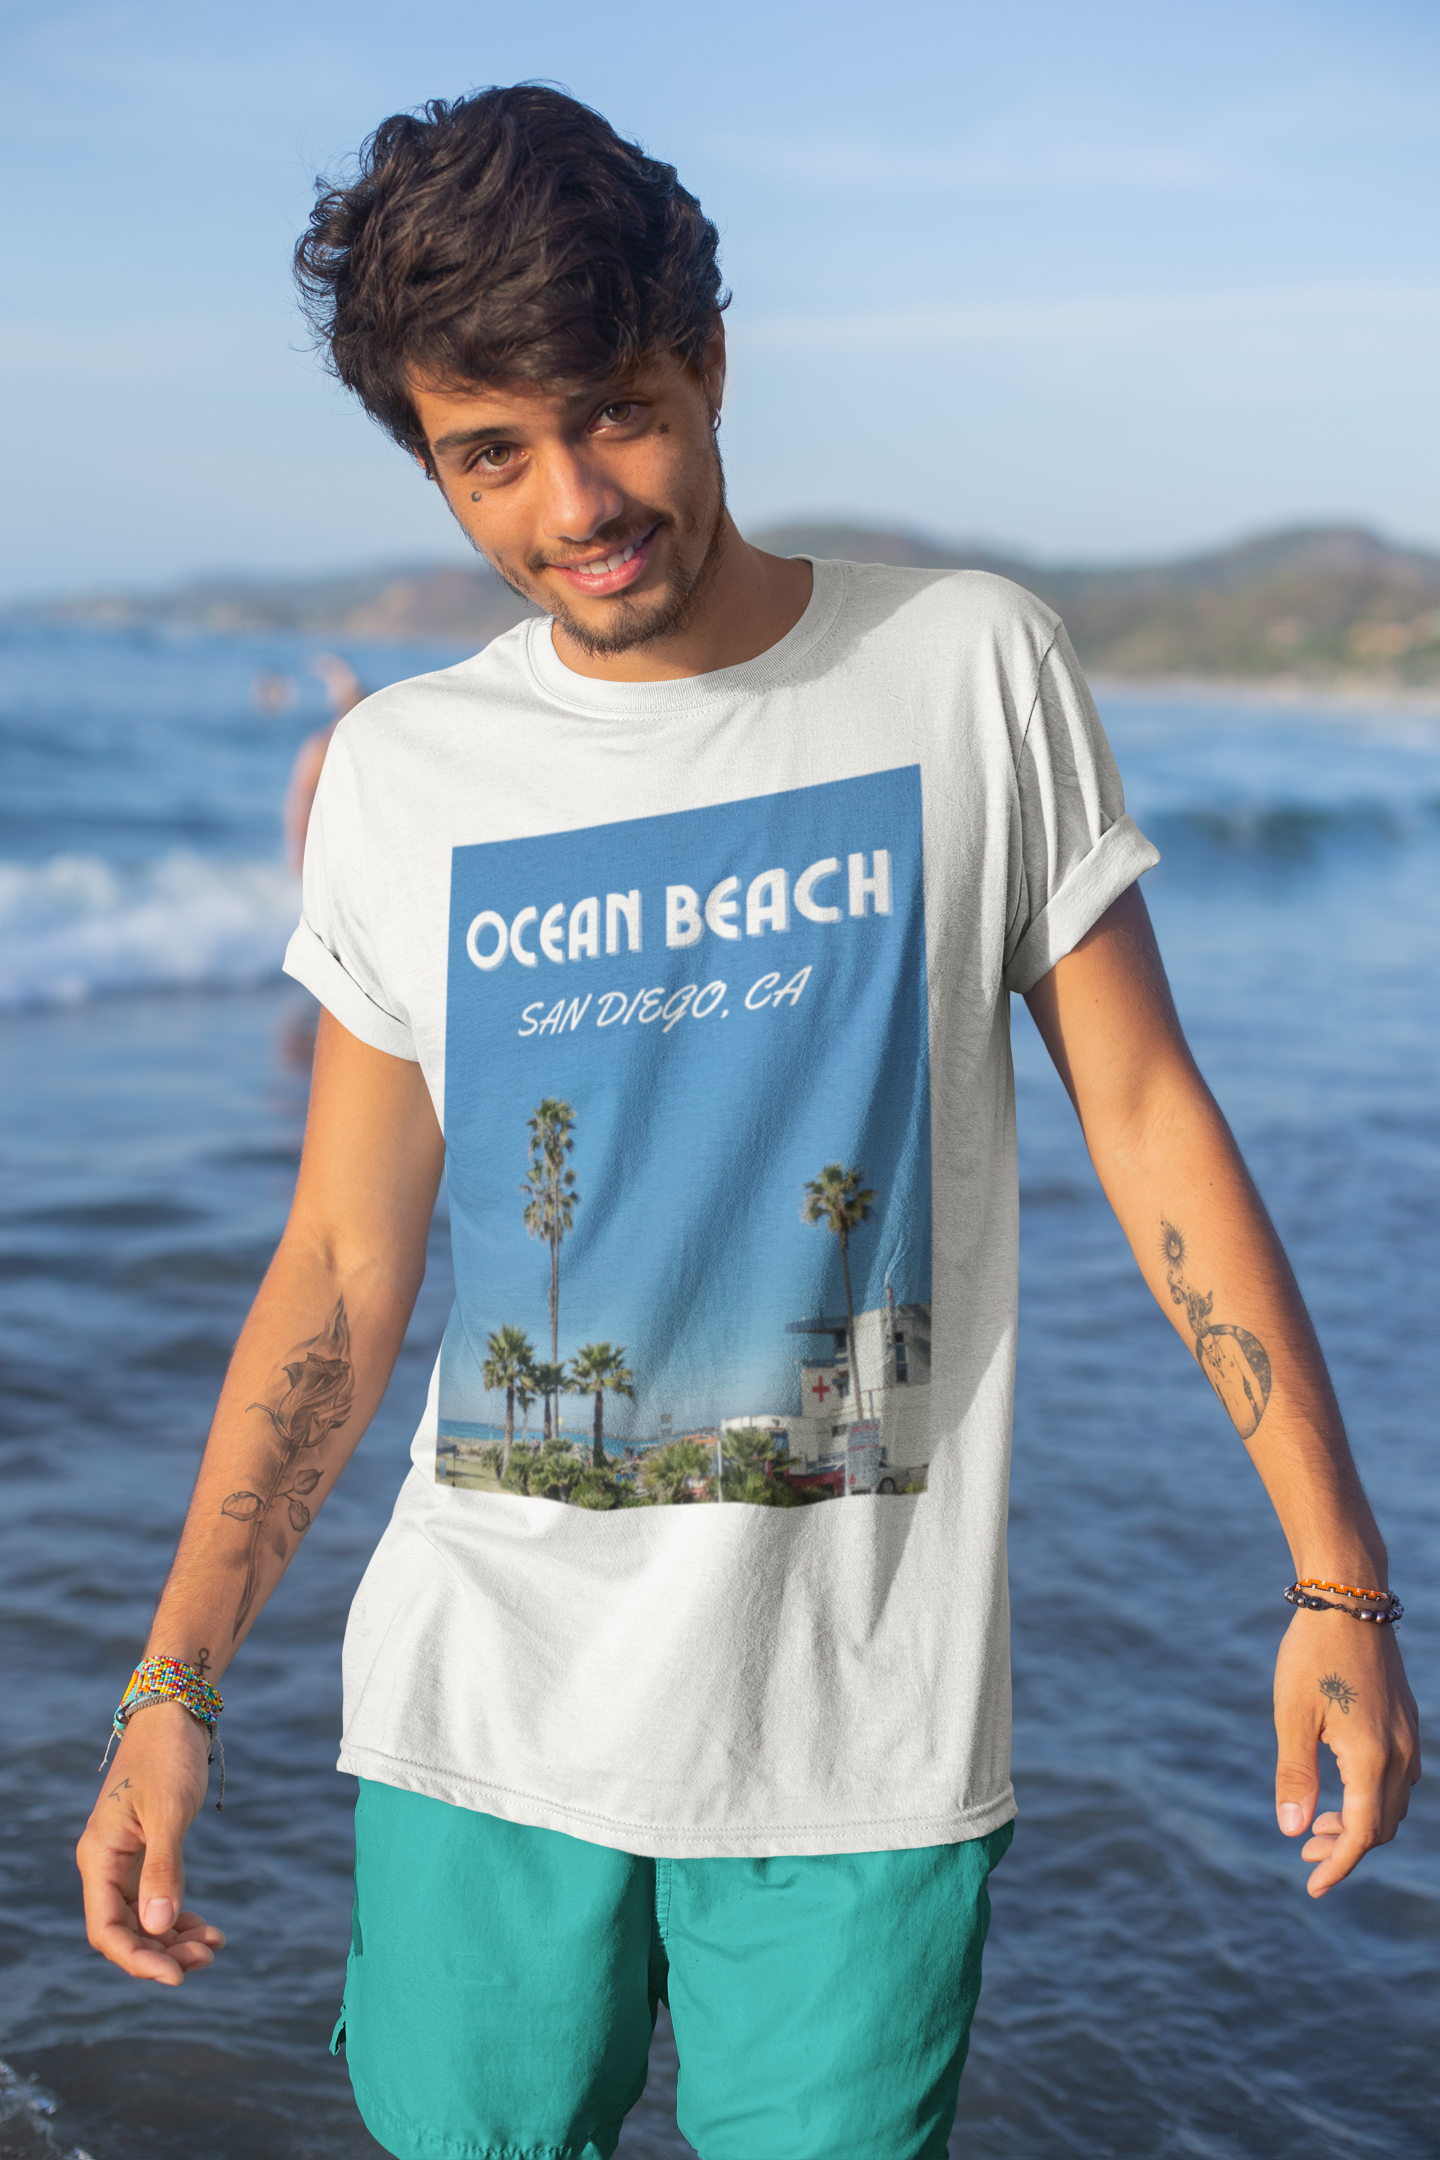 Smiling guy with tattoos wearing Ocean Beach t-shirt and green shorts posing in front on waves.